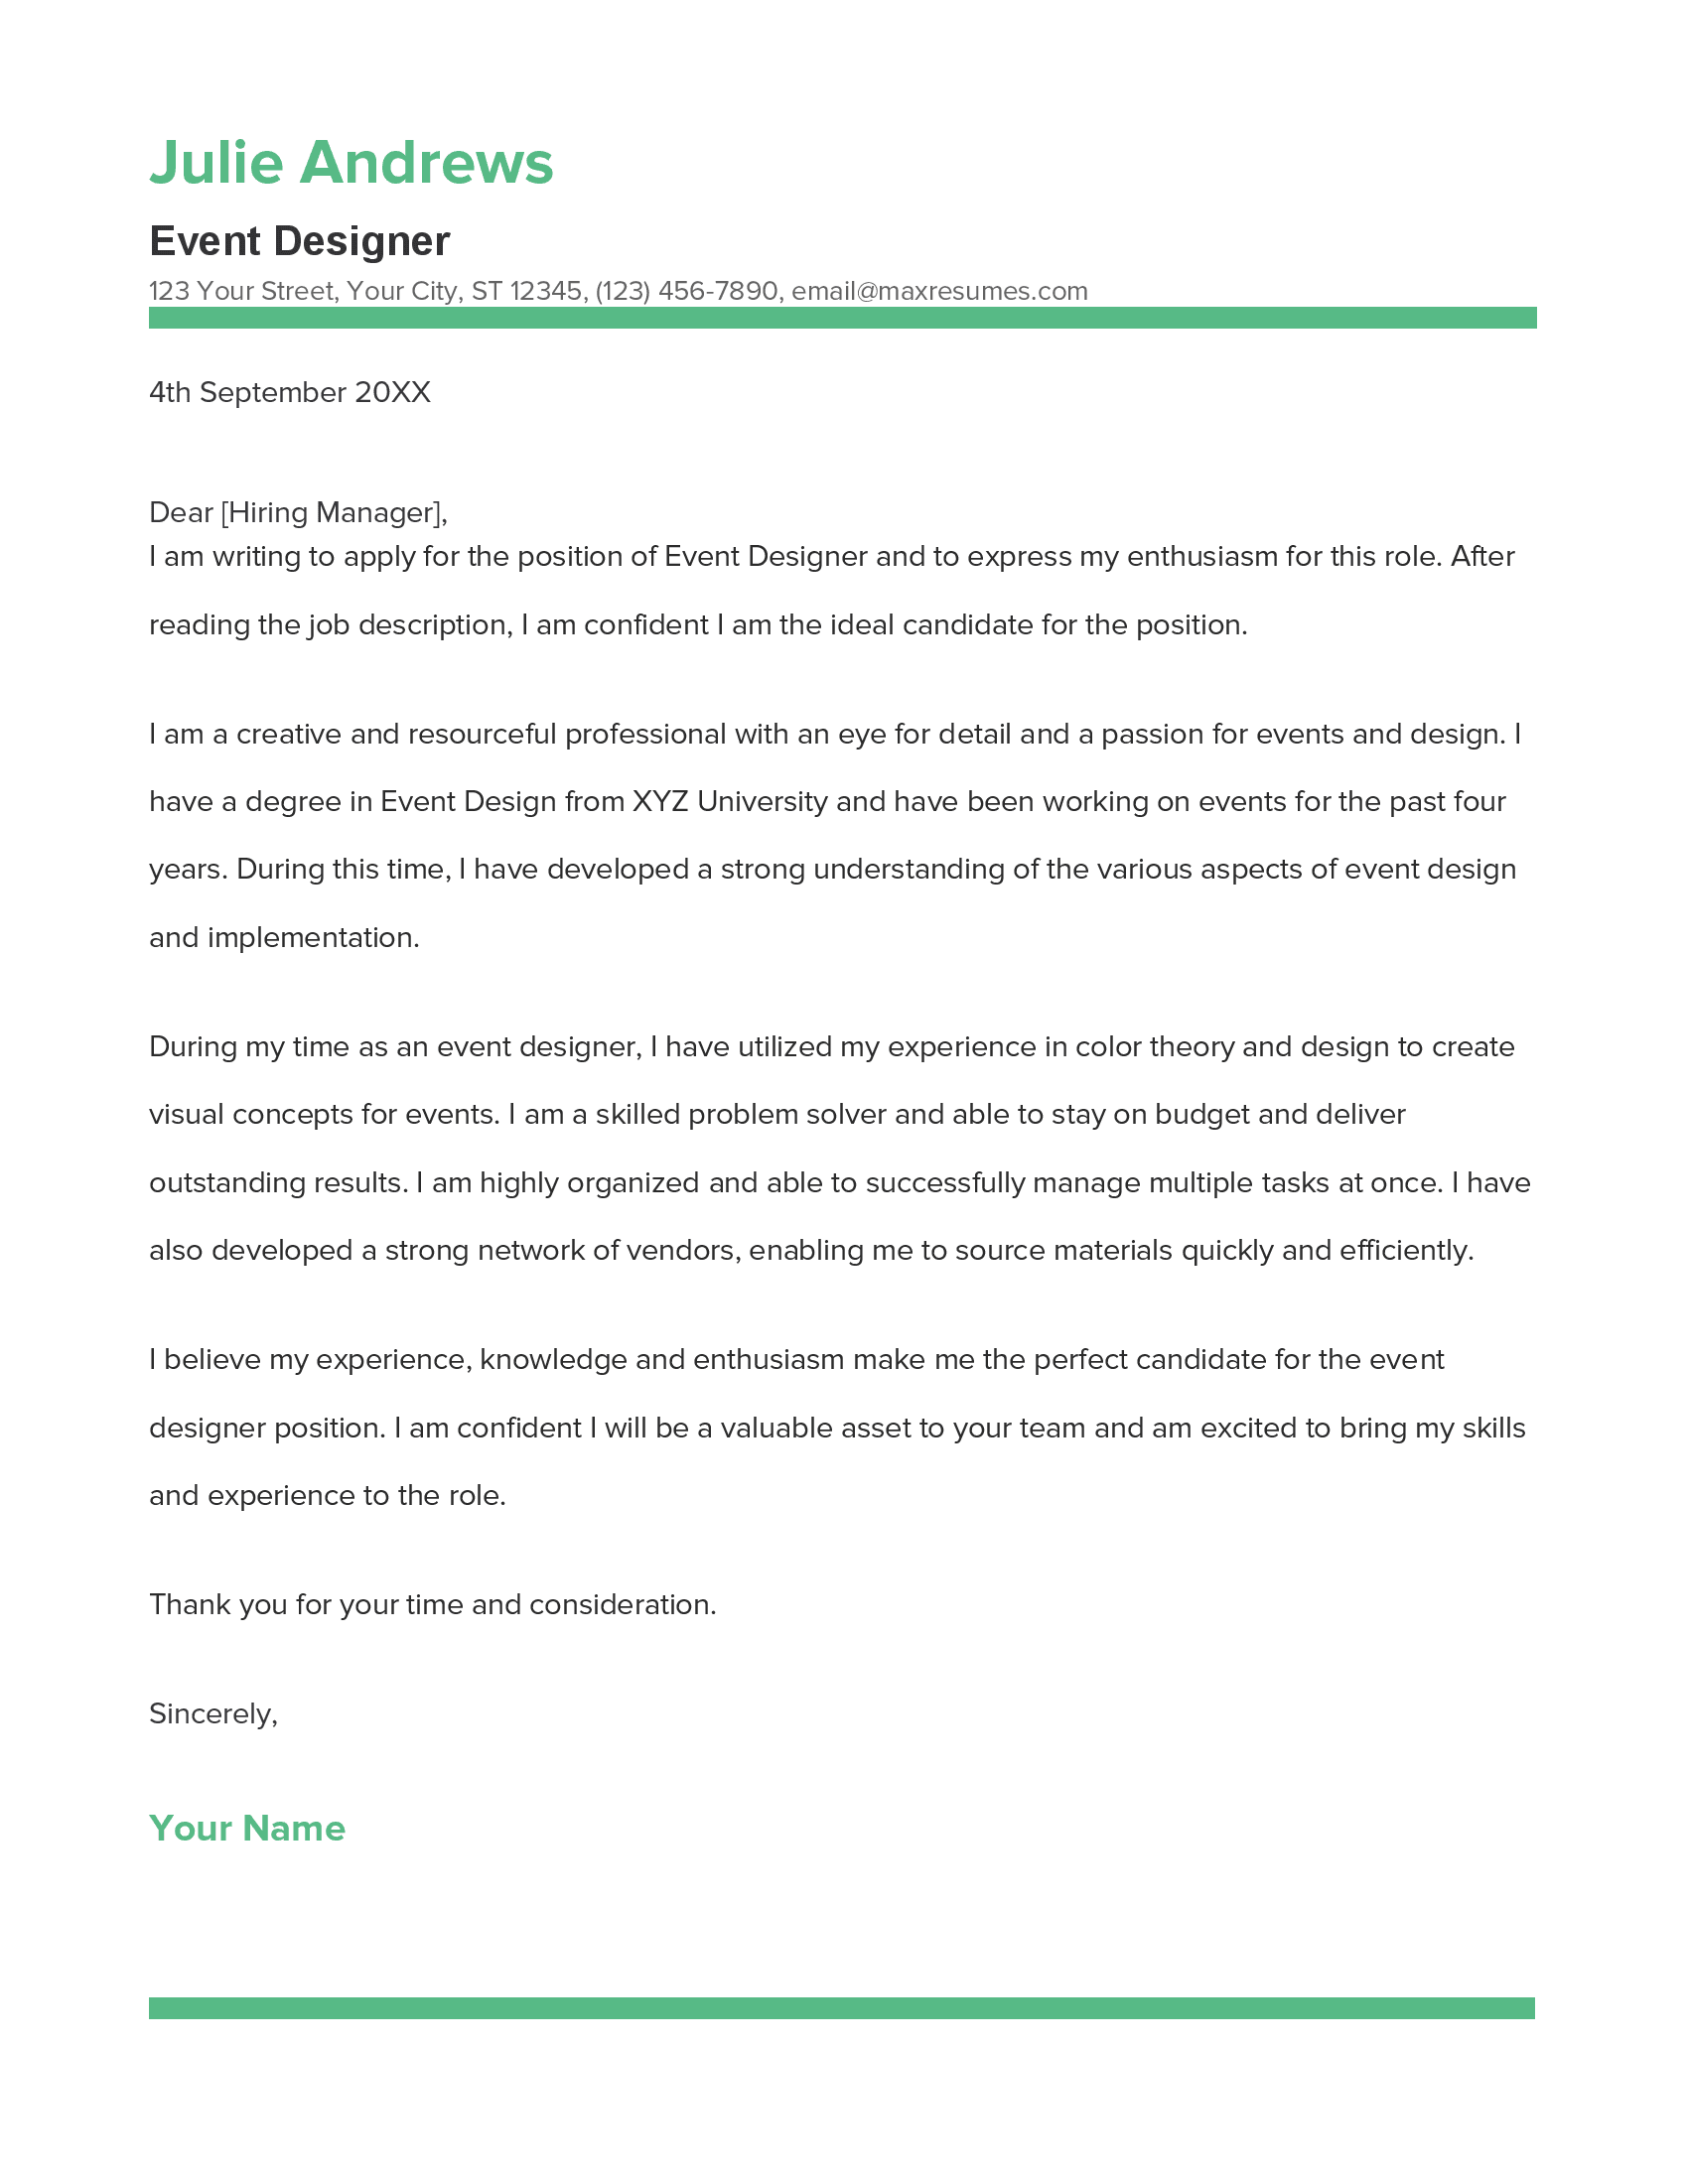 Event Designer Cover Letter Example